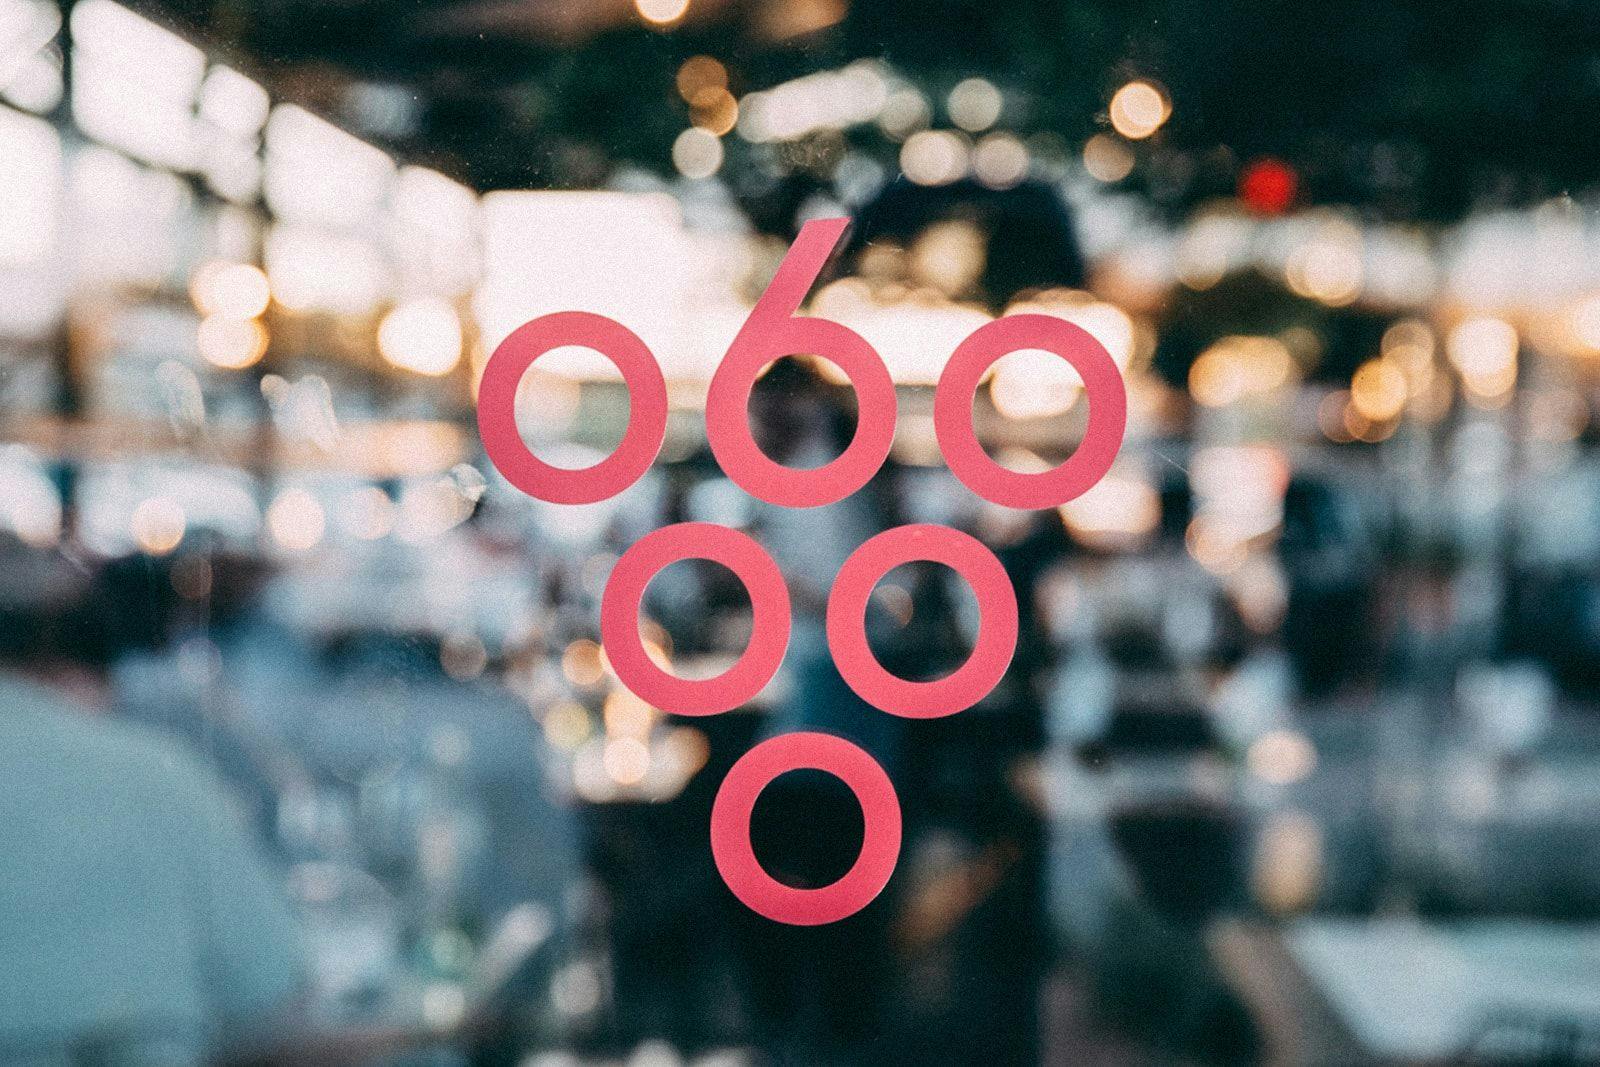 Sixty Vines logo in red in front of a blurred background